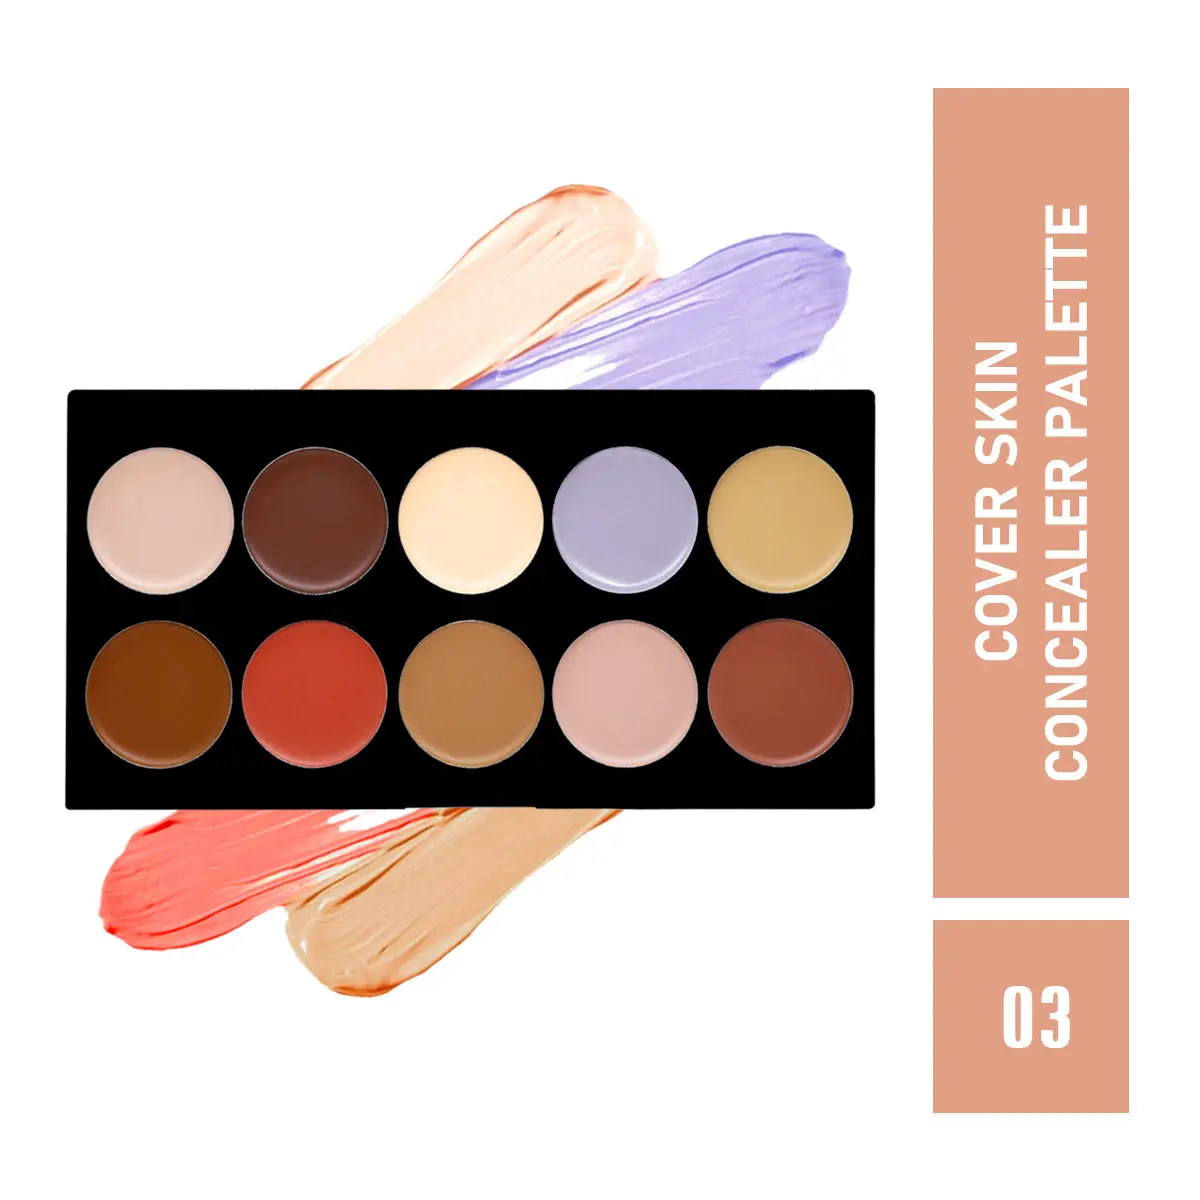 Mattlook Cover Skin Concealer Palette Full Coverage Colour Correcting Lightweight Long-lasting Waterproof Creamy Formula - 03 (18g)